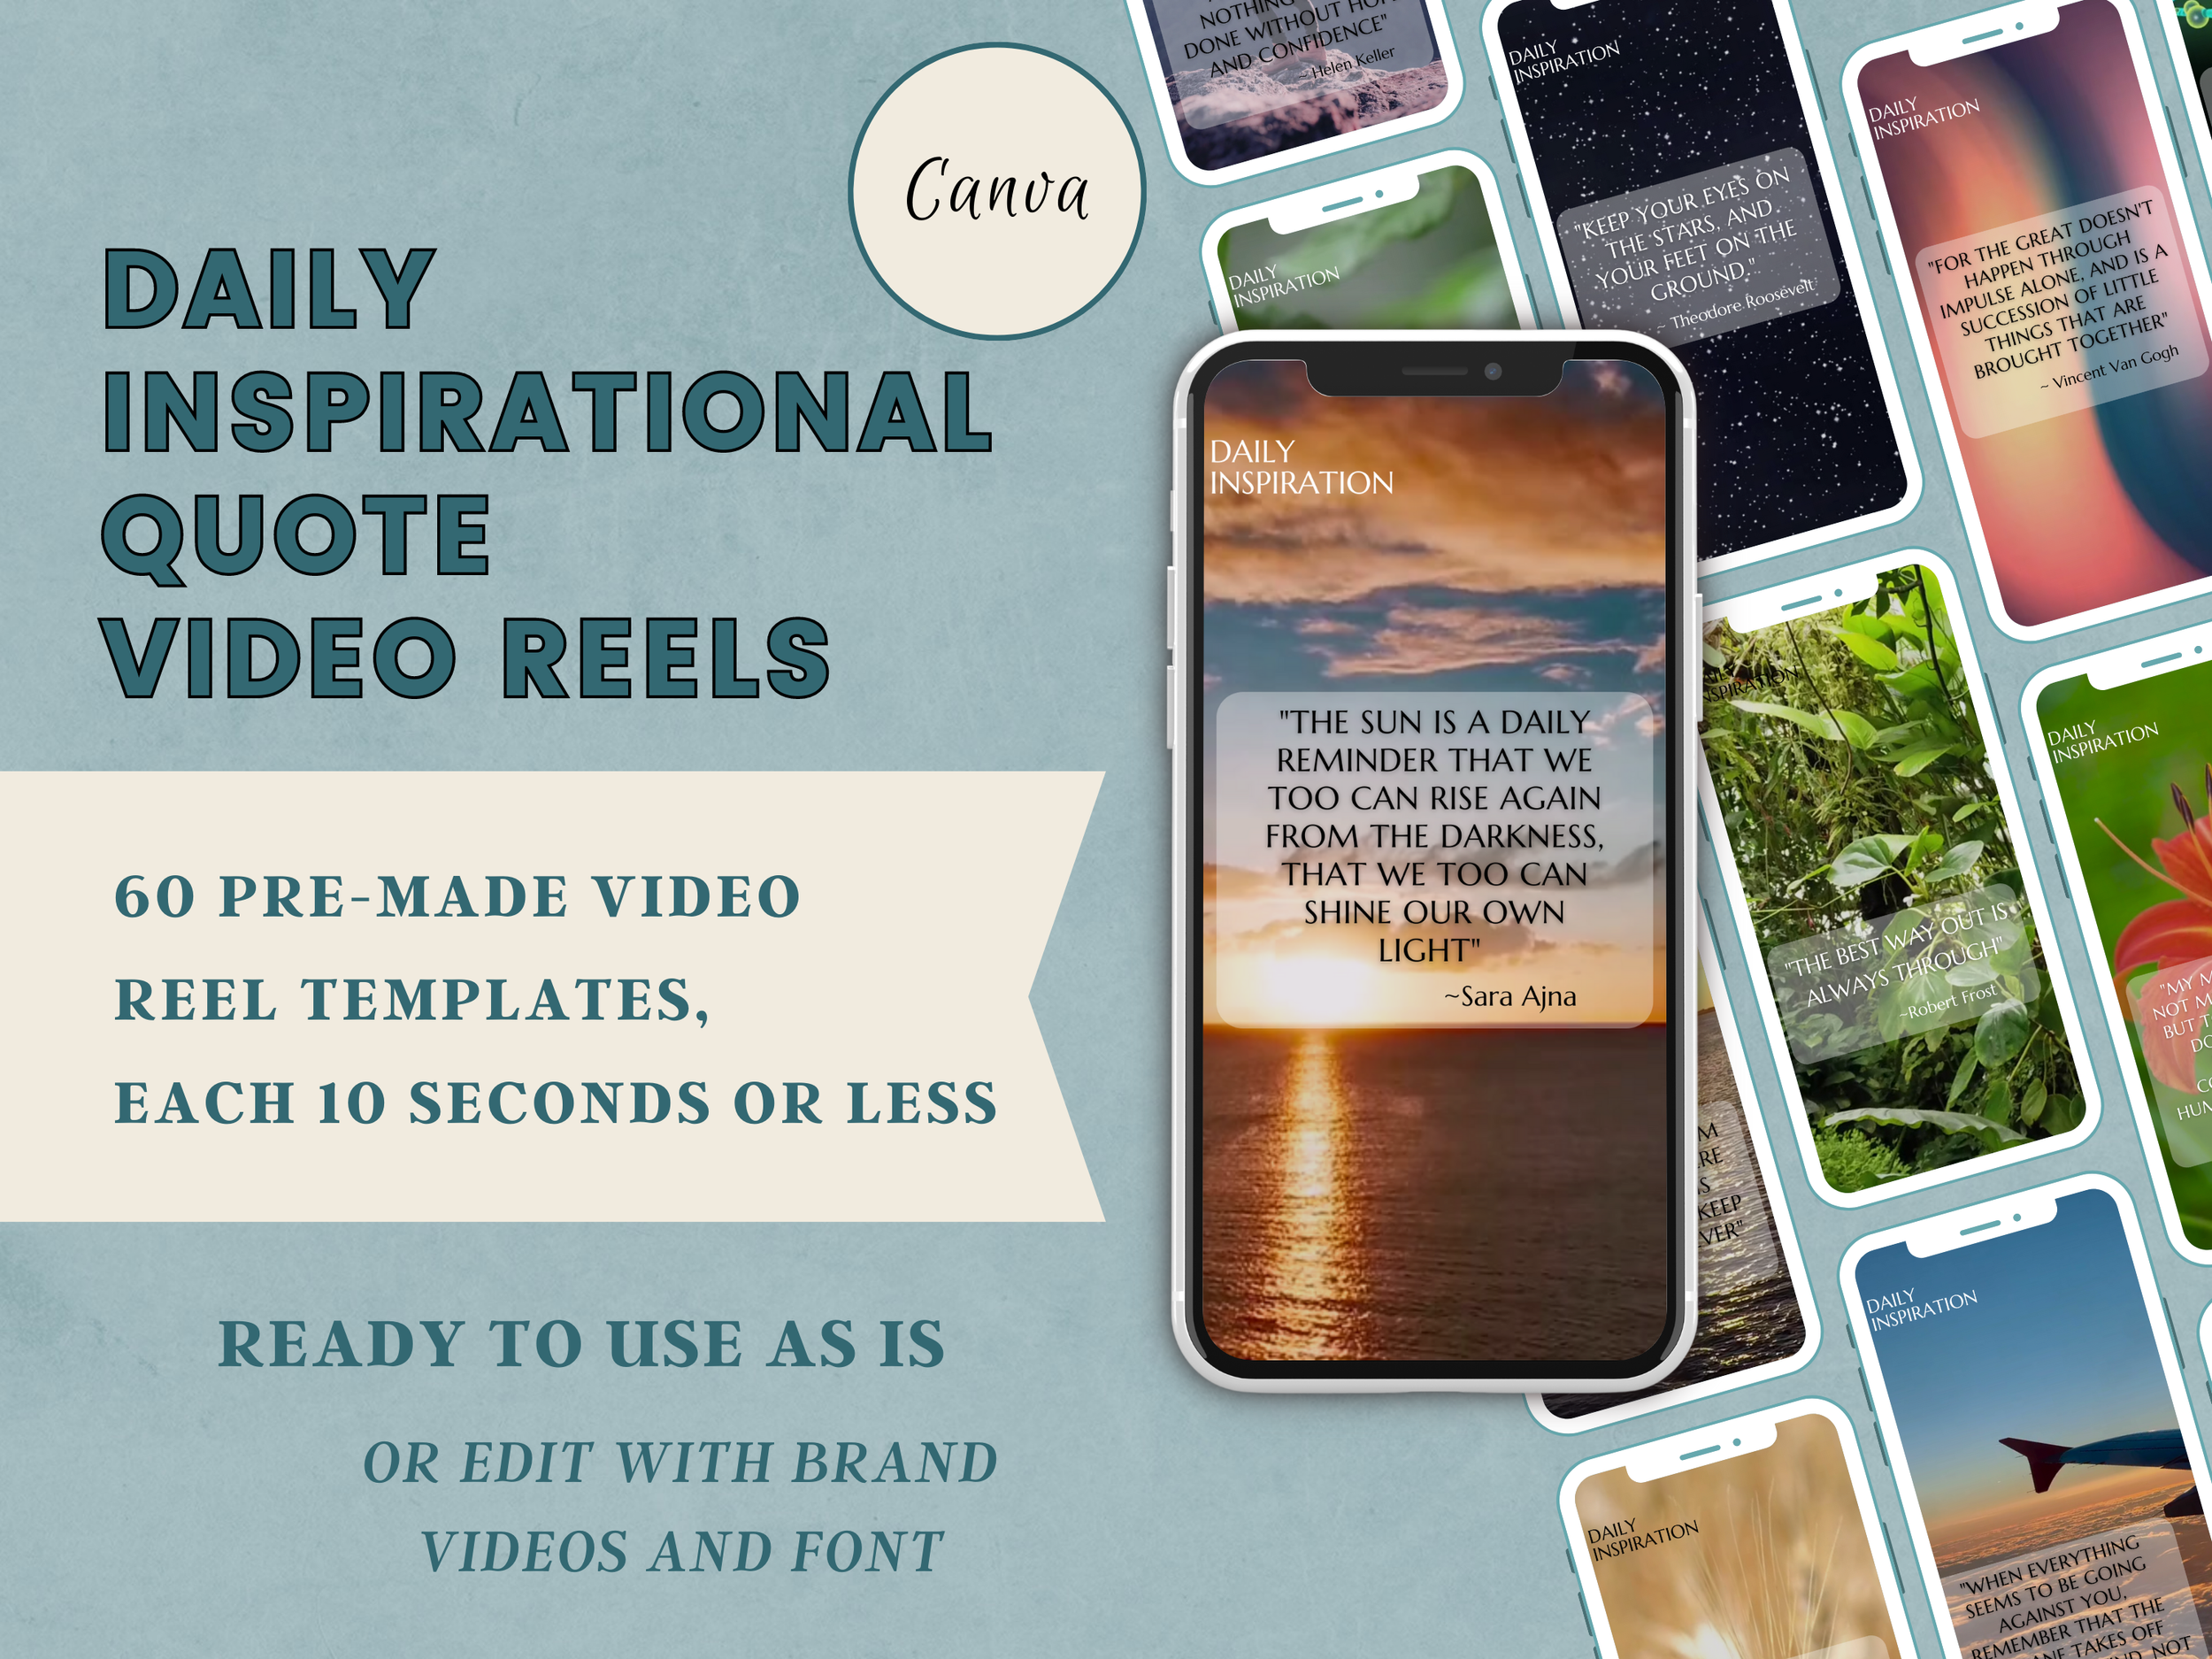 Daily Inspiration IG Reels ETSY PRODUCT LONG LISTING PHOTOS - GBT03 L6 (3).png